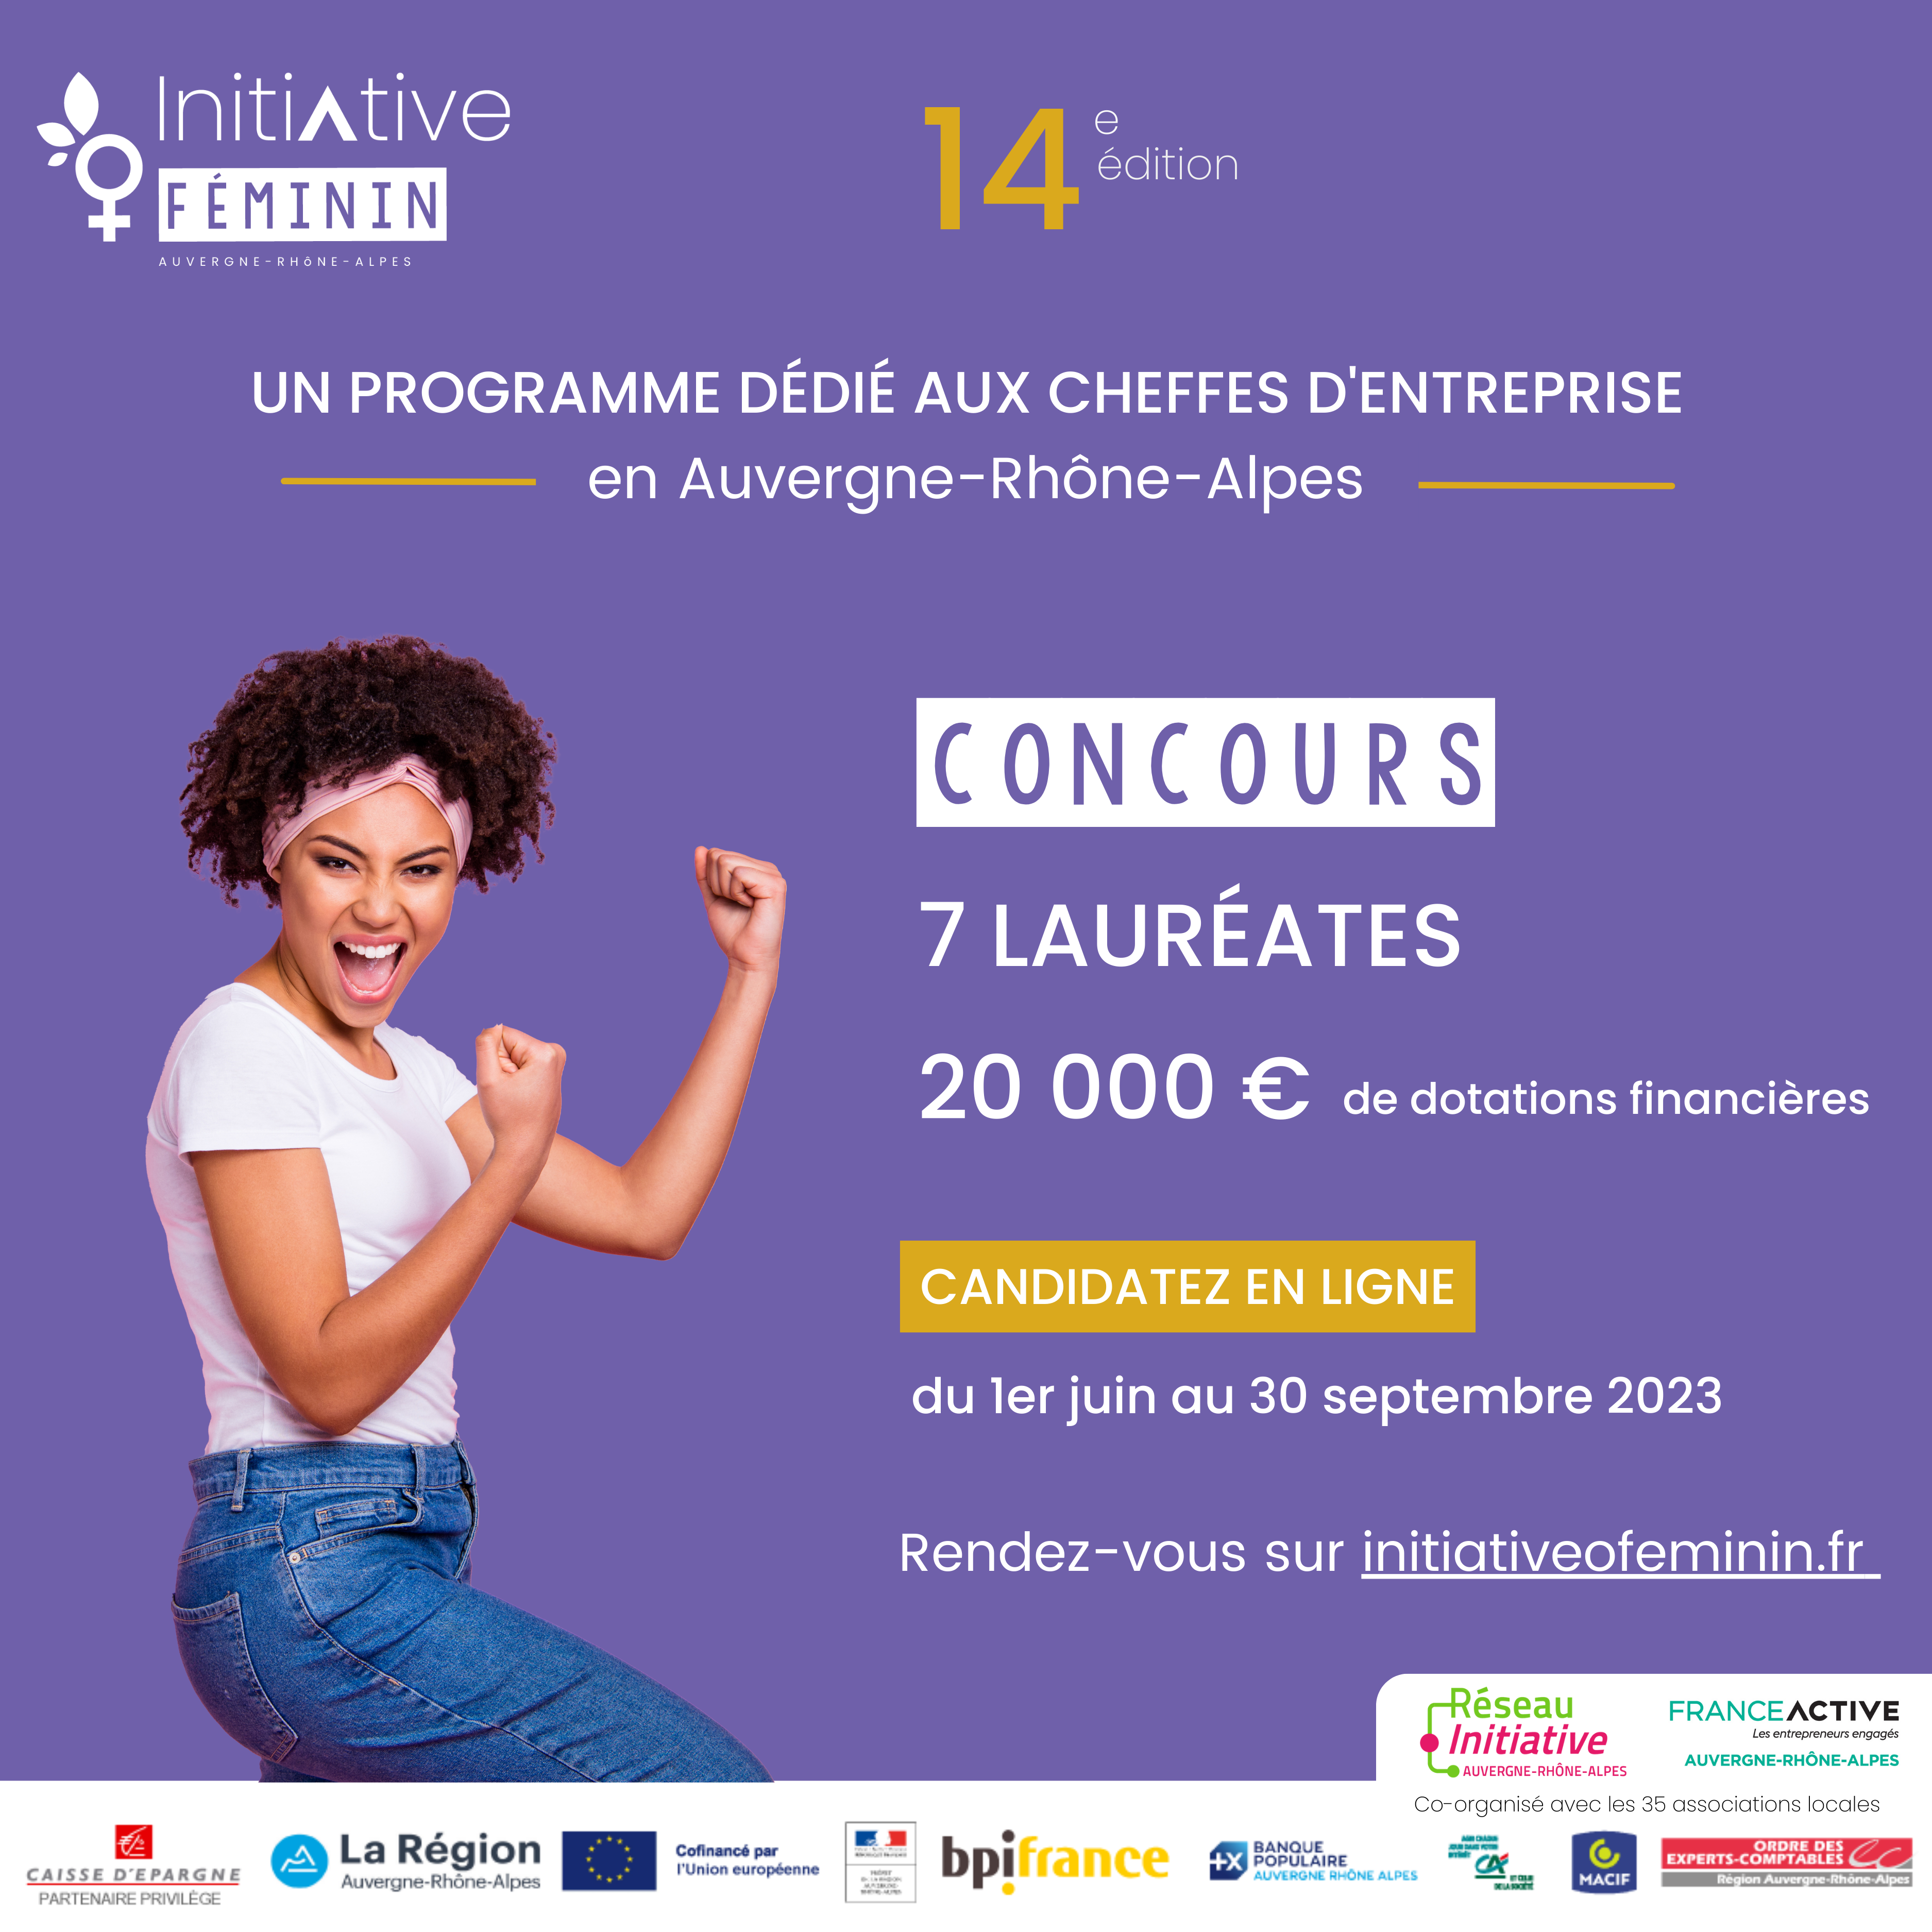 Concours 2023